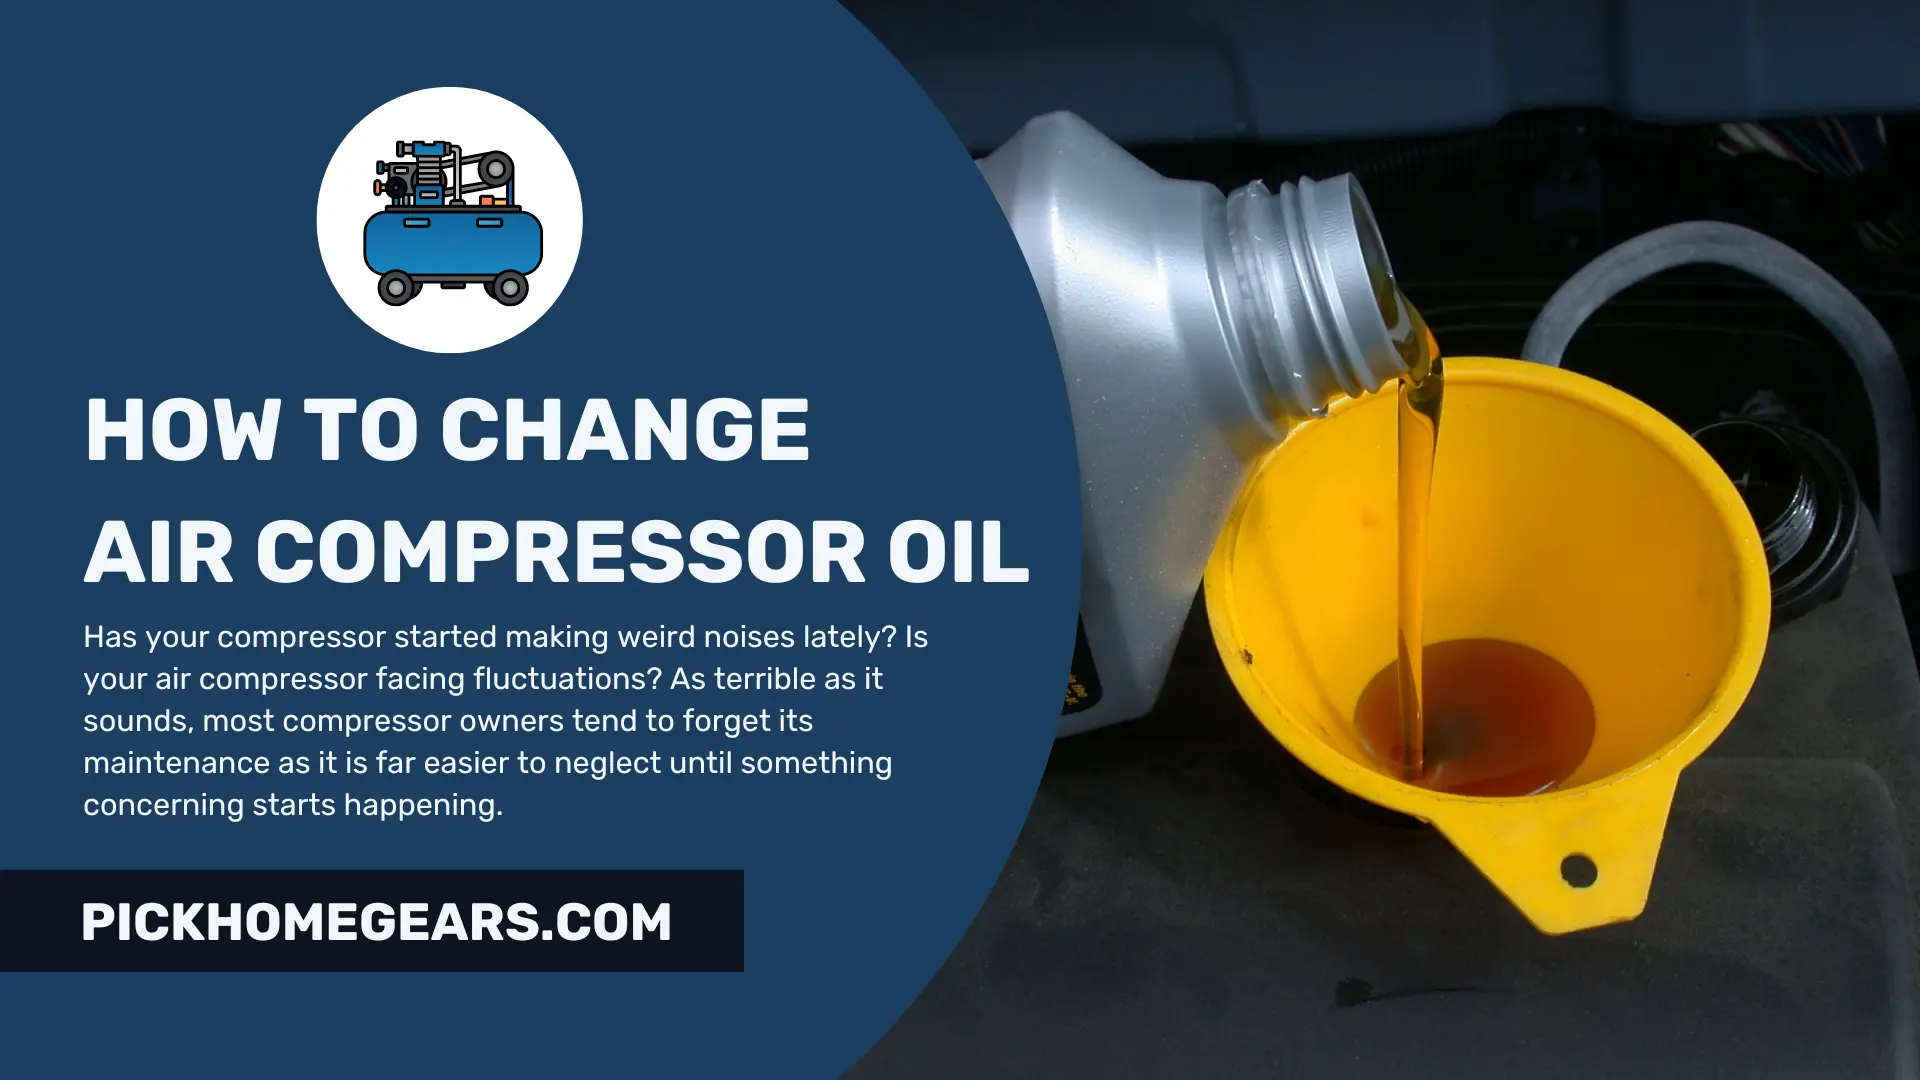 How To Change Air Compressor Oil